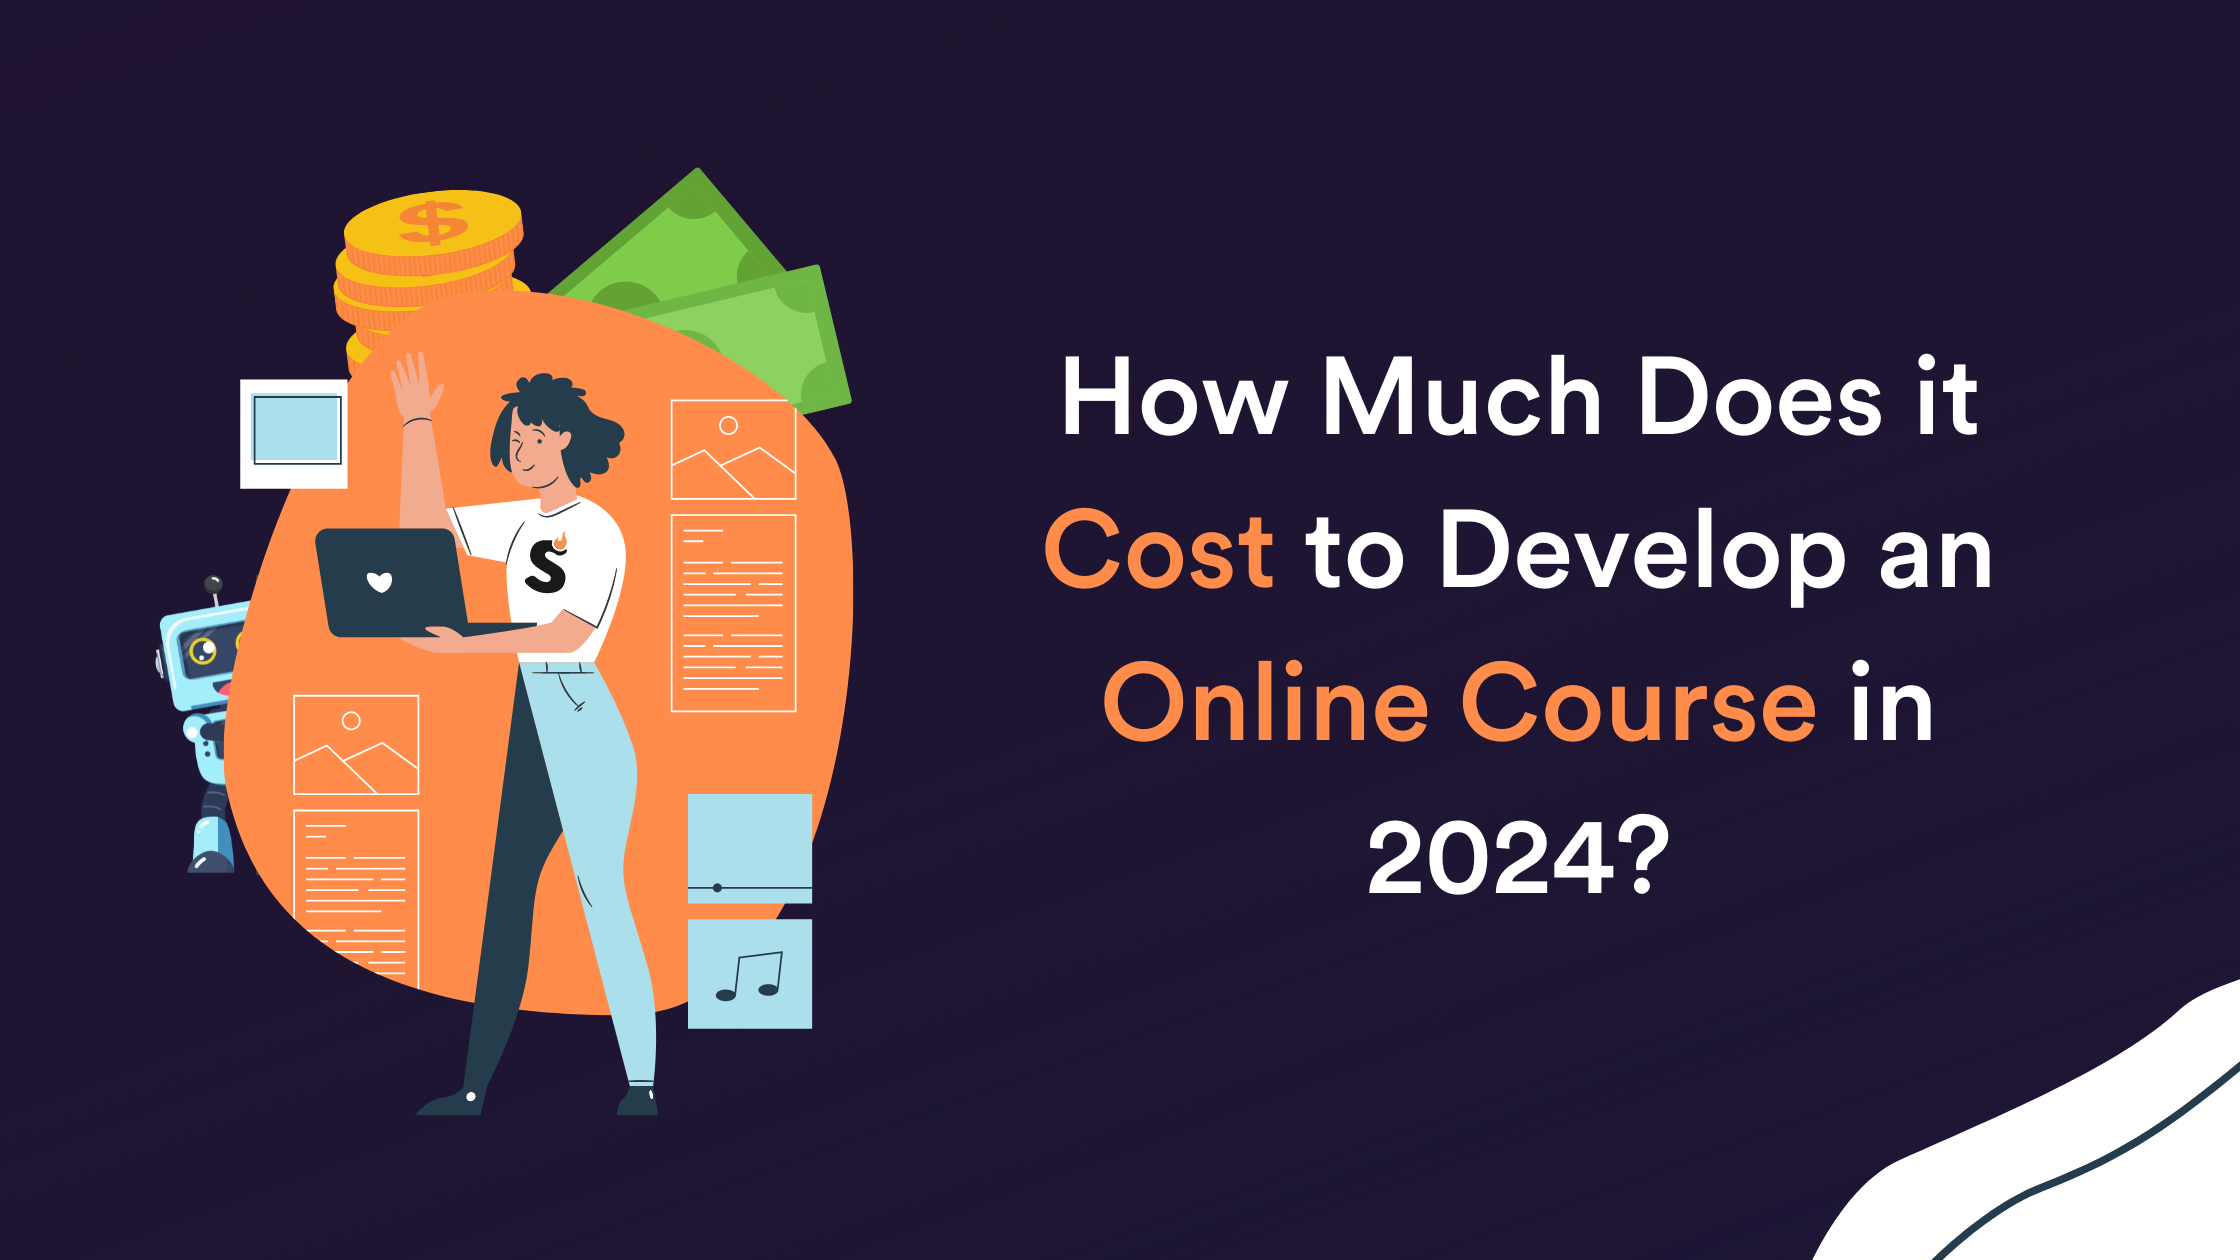 How Much Does it Cost to Develop an Online Course in 2024